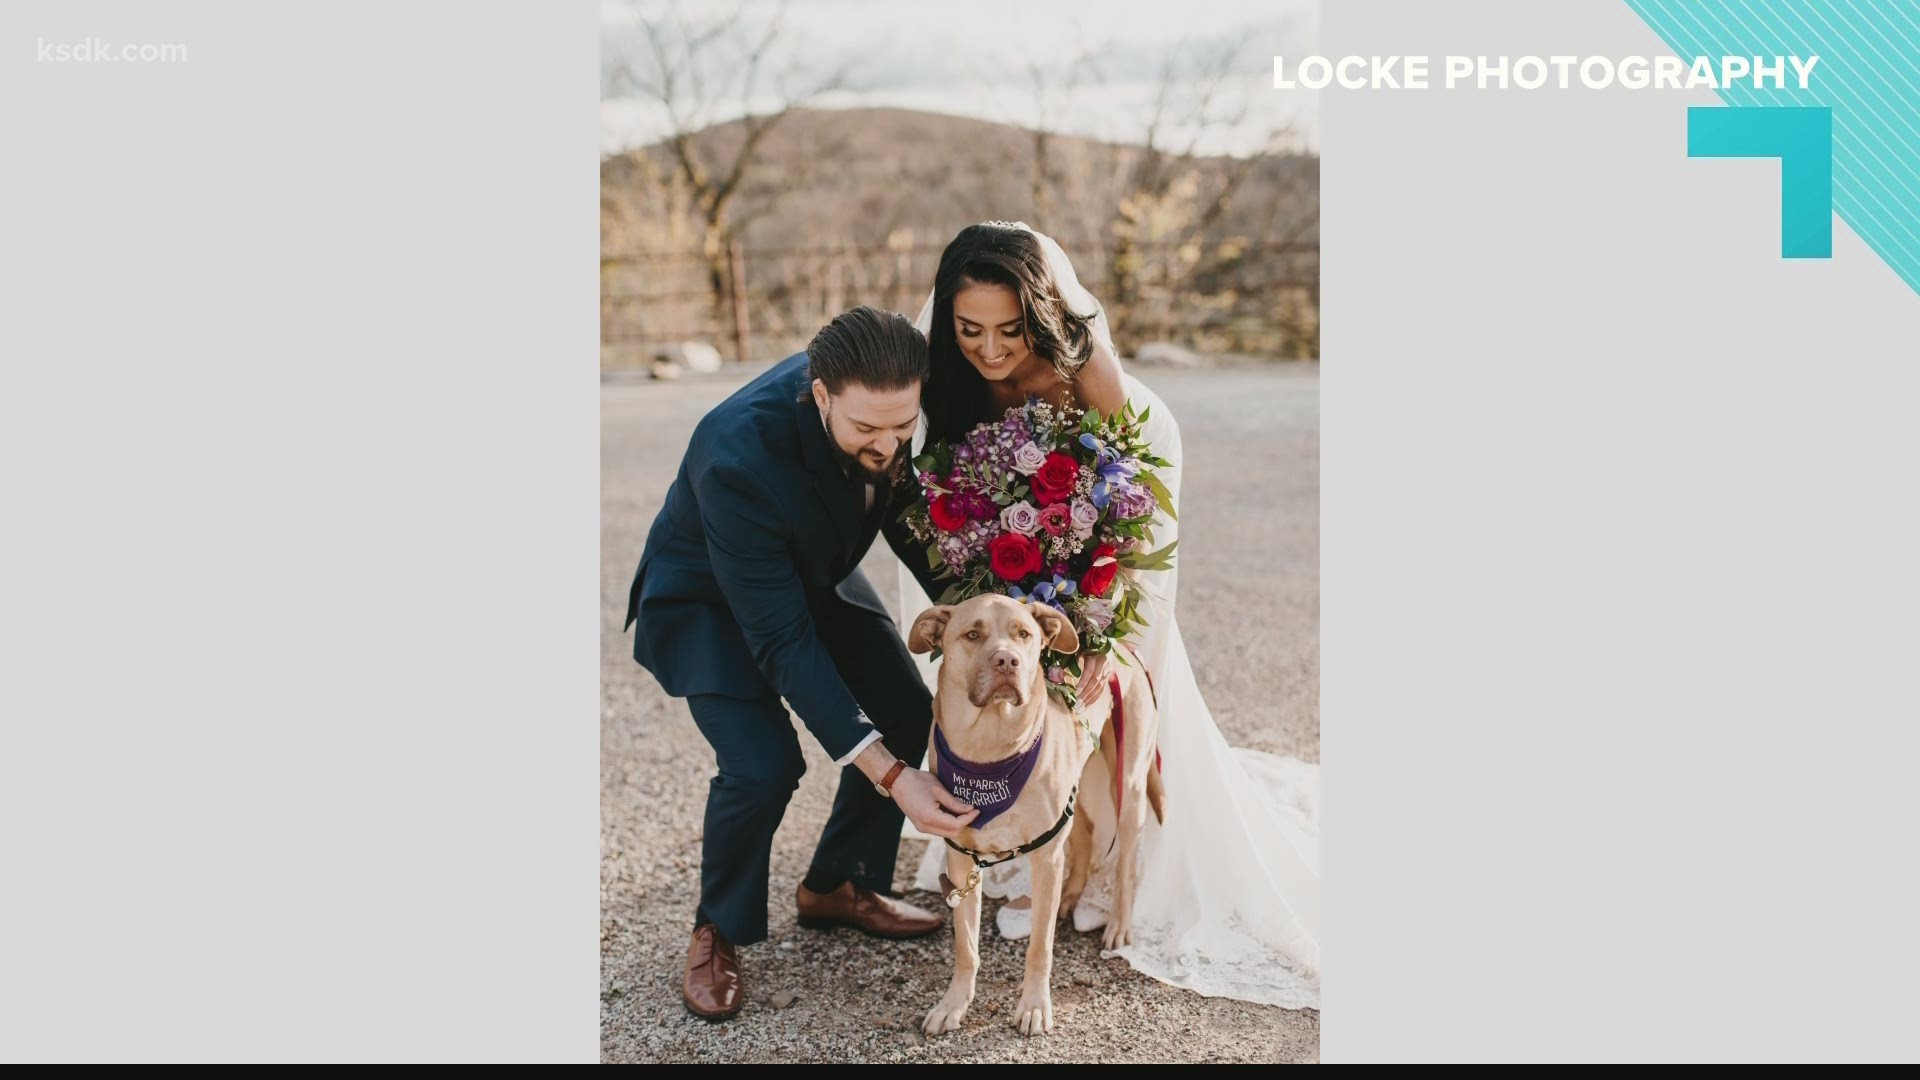 Whether it’s a ceremony role or your wedding day photos, WedPets handles all aspects of assisting with your pets on the big day.